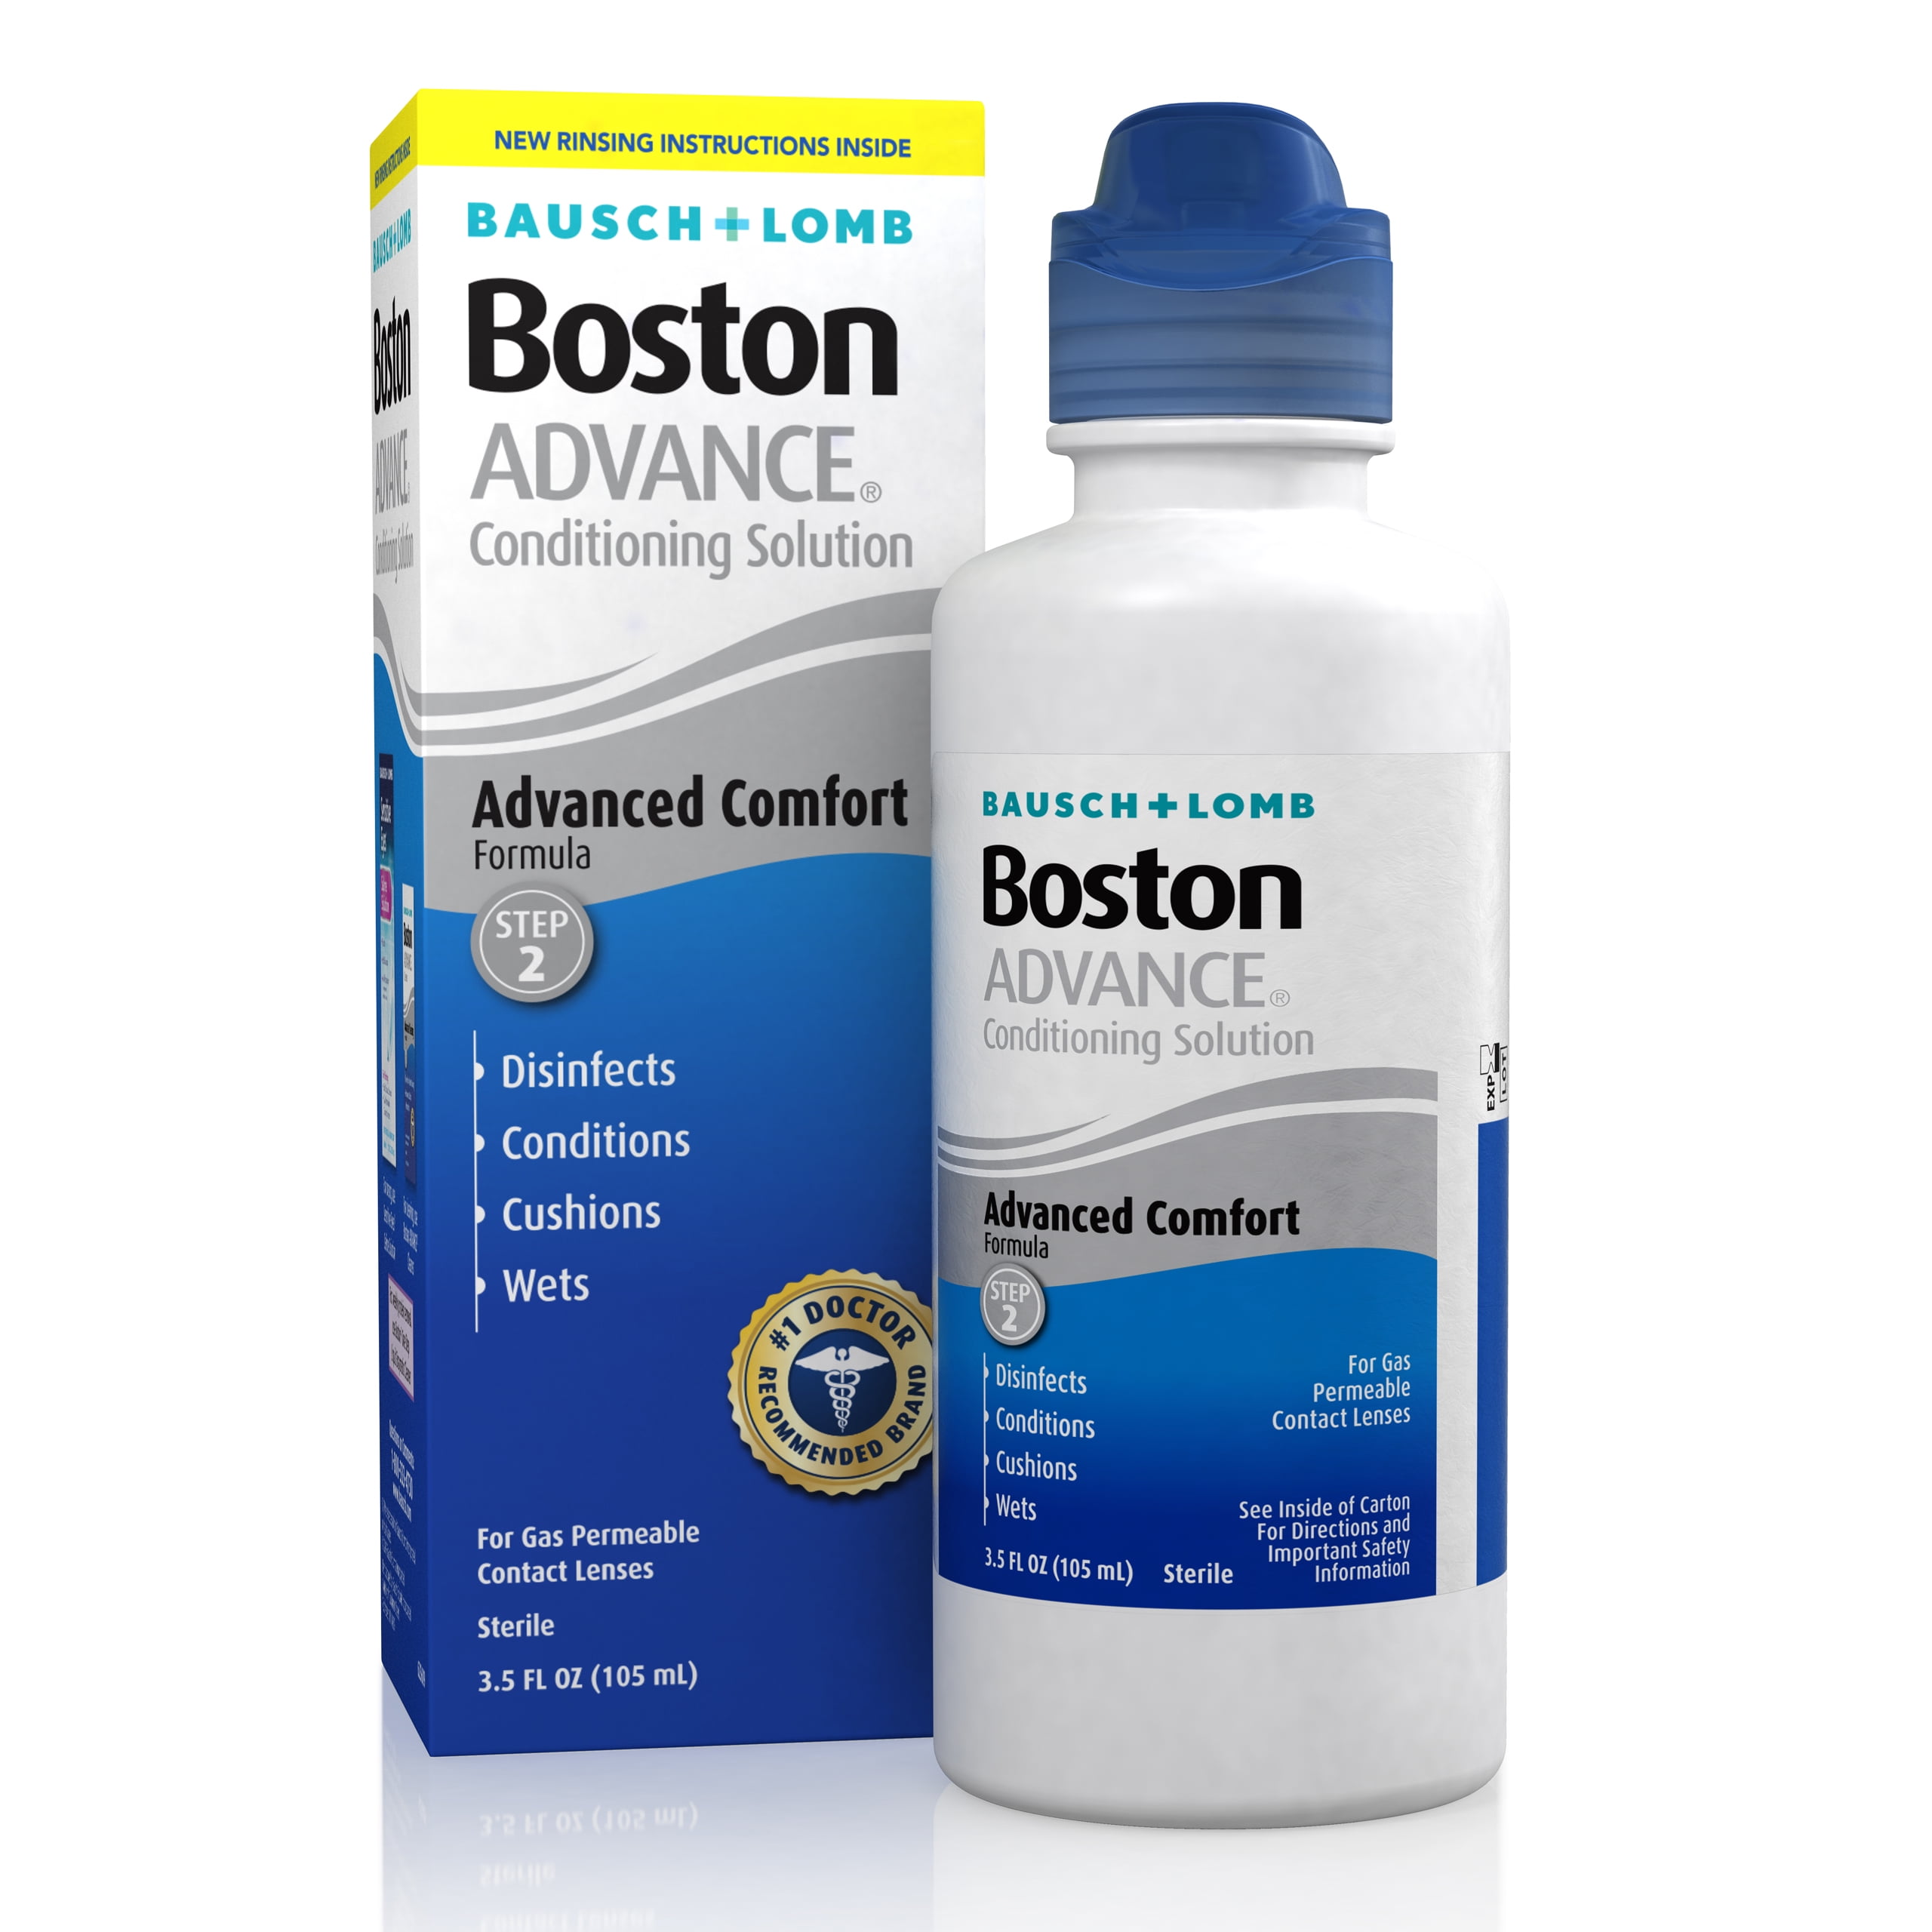 Boston ADVANCE Conditioning Contact Lens Solution for Rigid Gas Permeable Lenses  from Bausch + Lomb, 3.5 fl. oz.